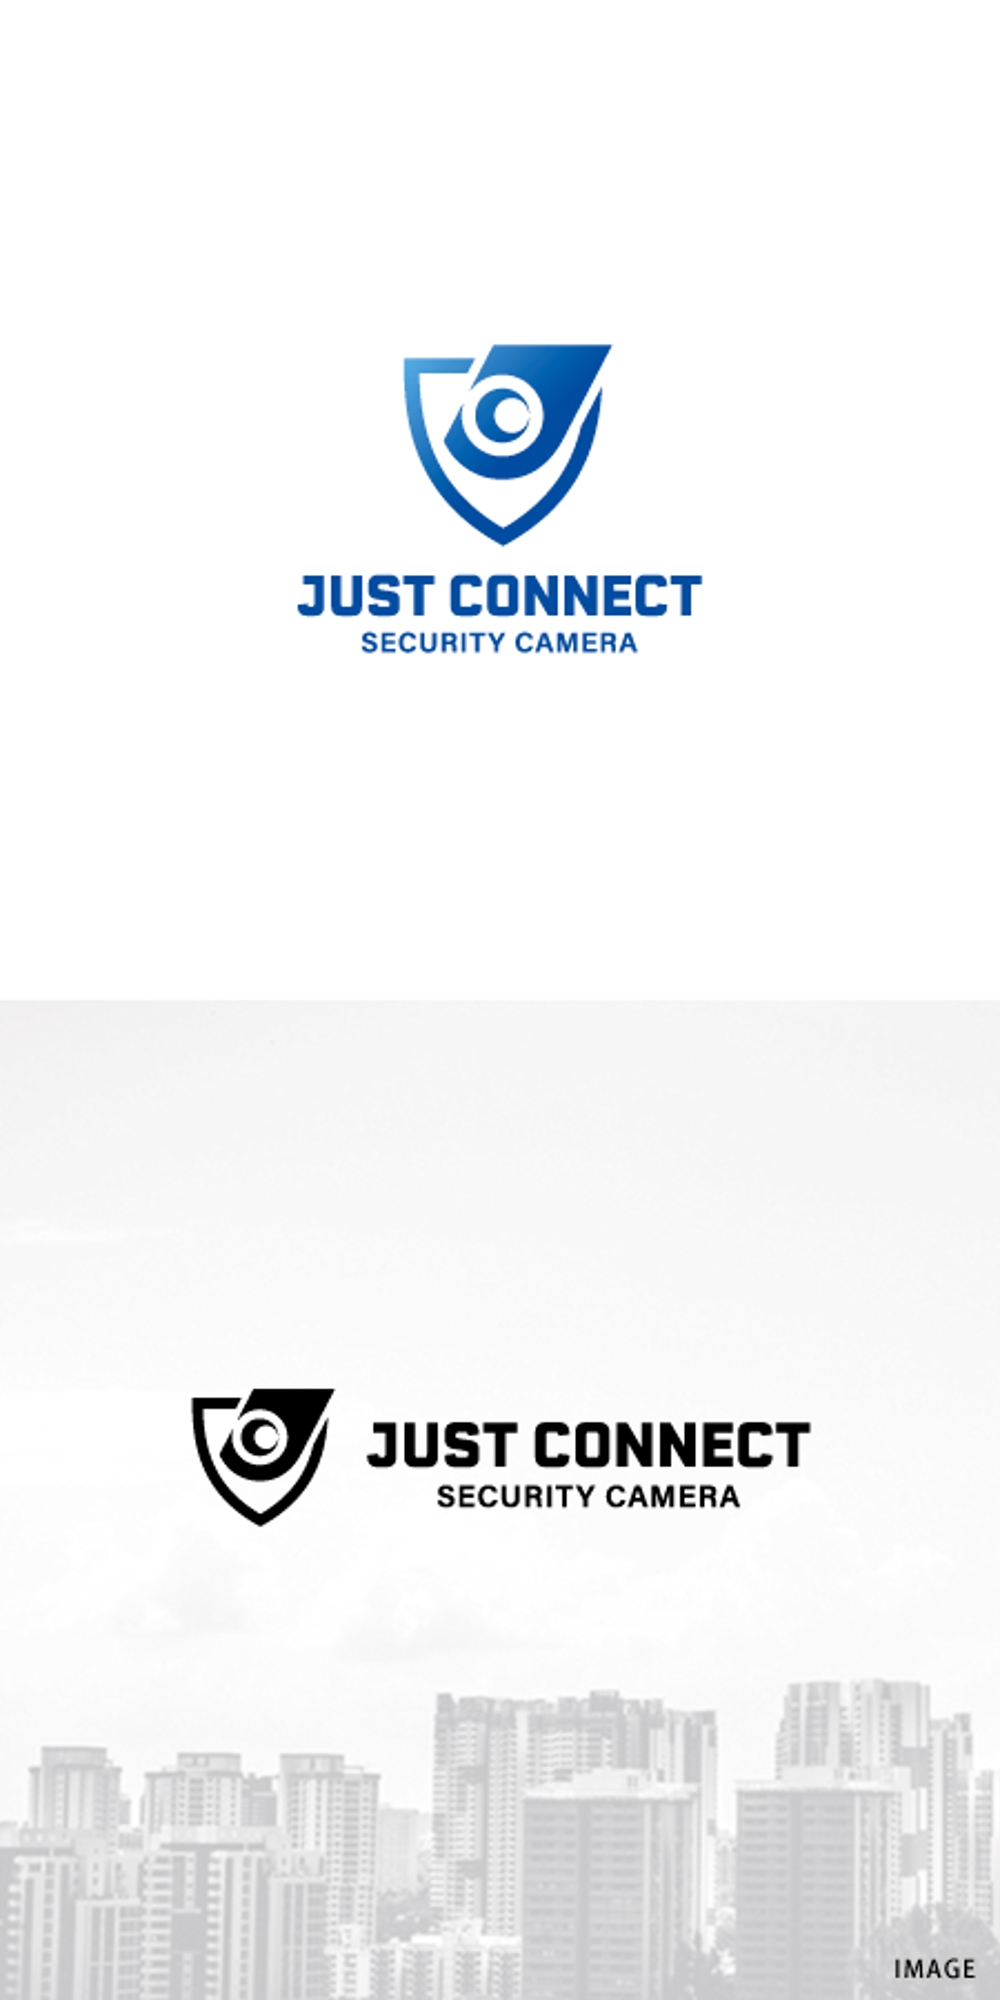 justconnect_1a.jpg